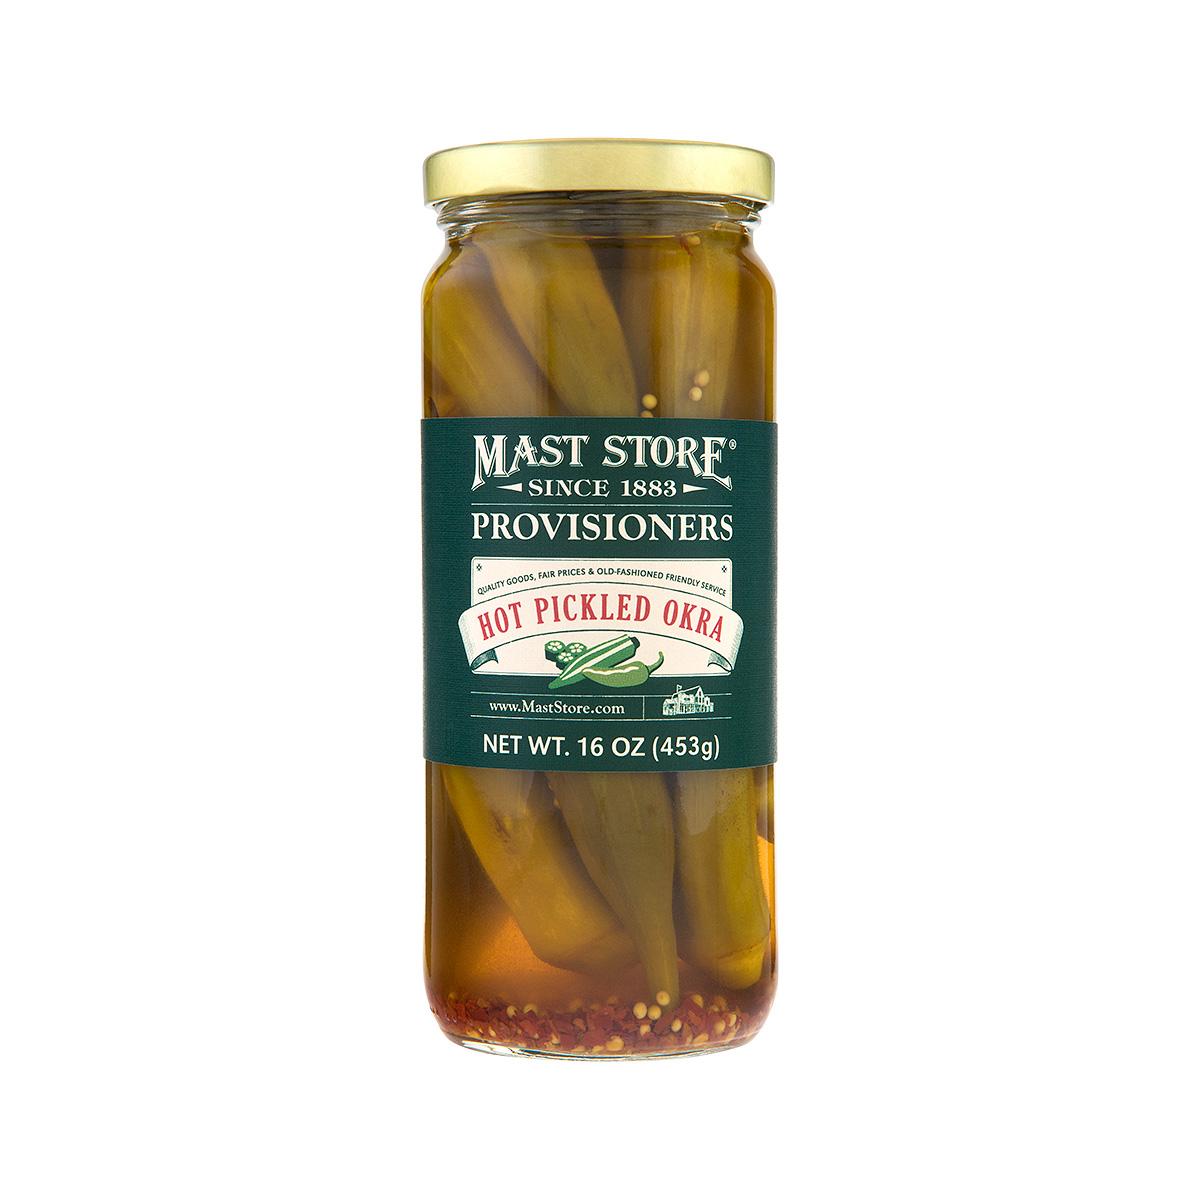  Mast Store Provisioners Hot Pickled Okra